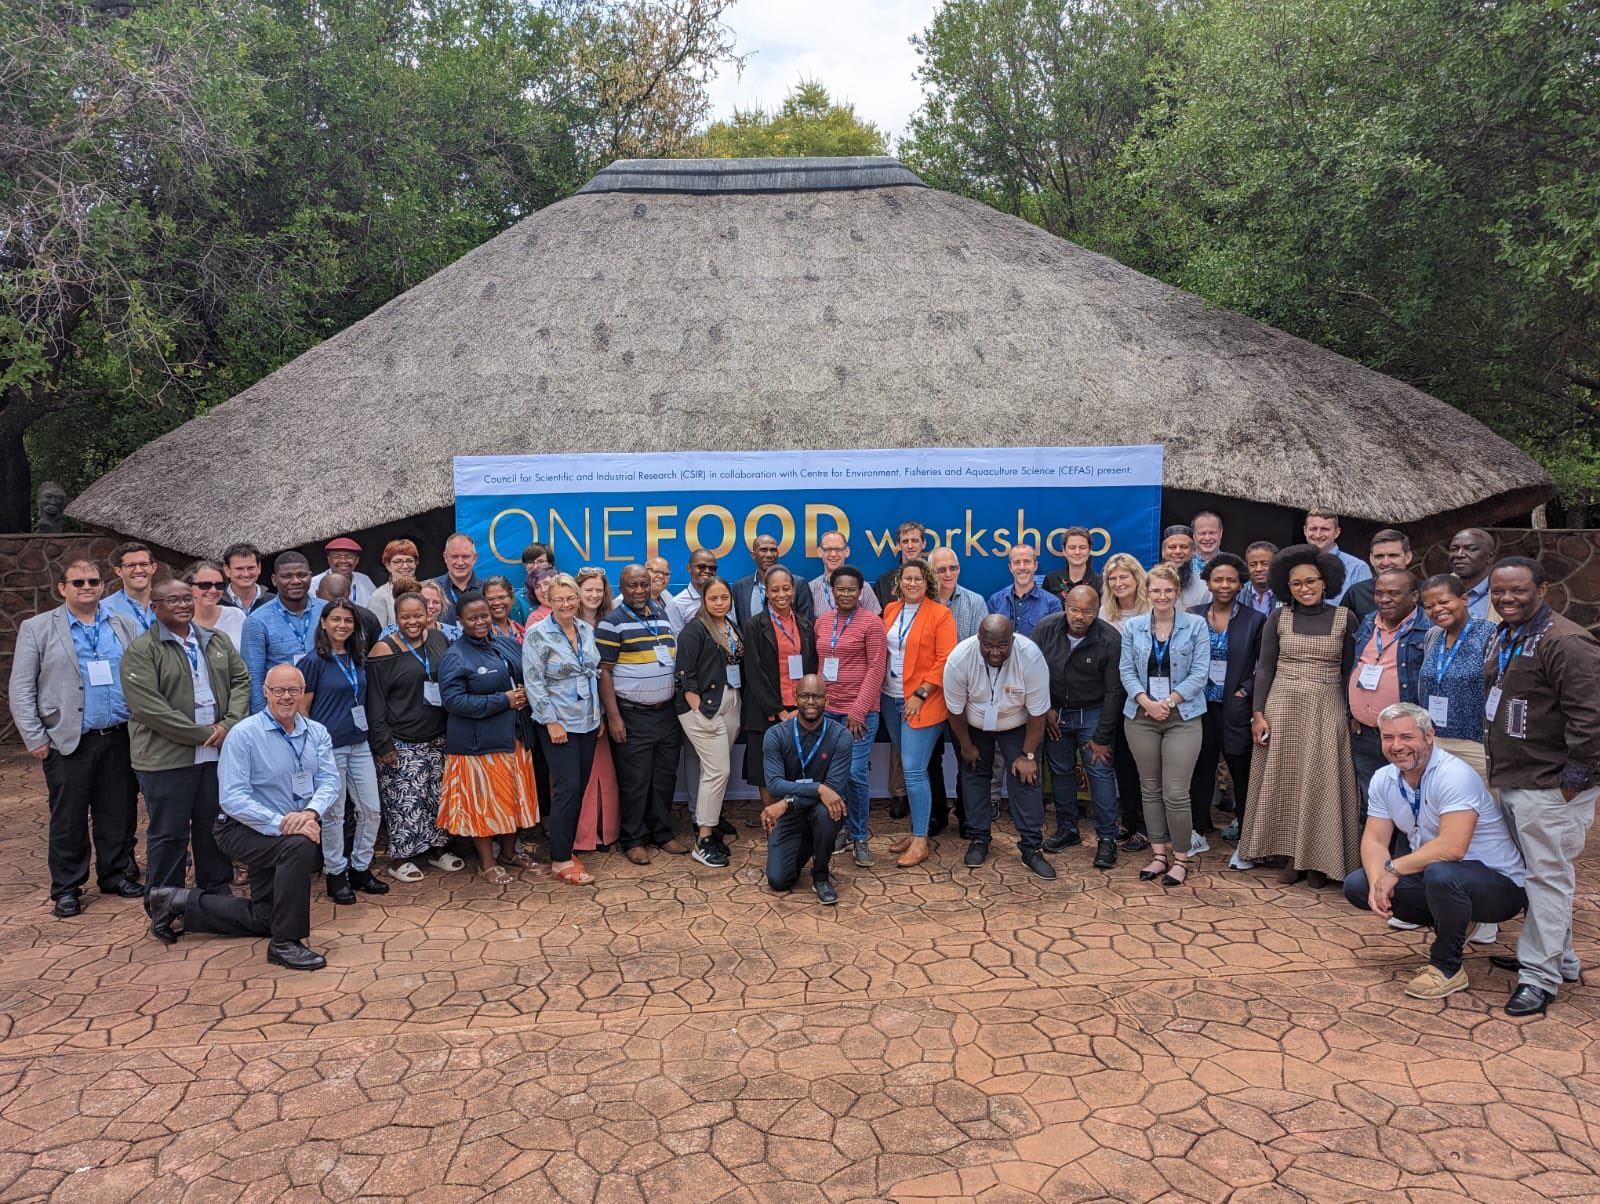 group from the conference outside the conference location in South Africa